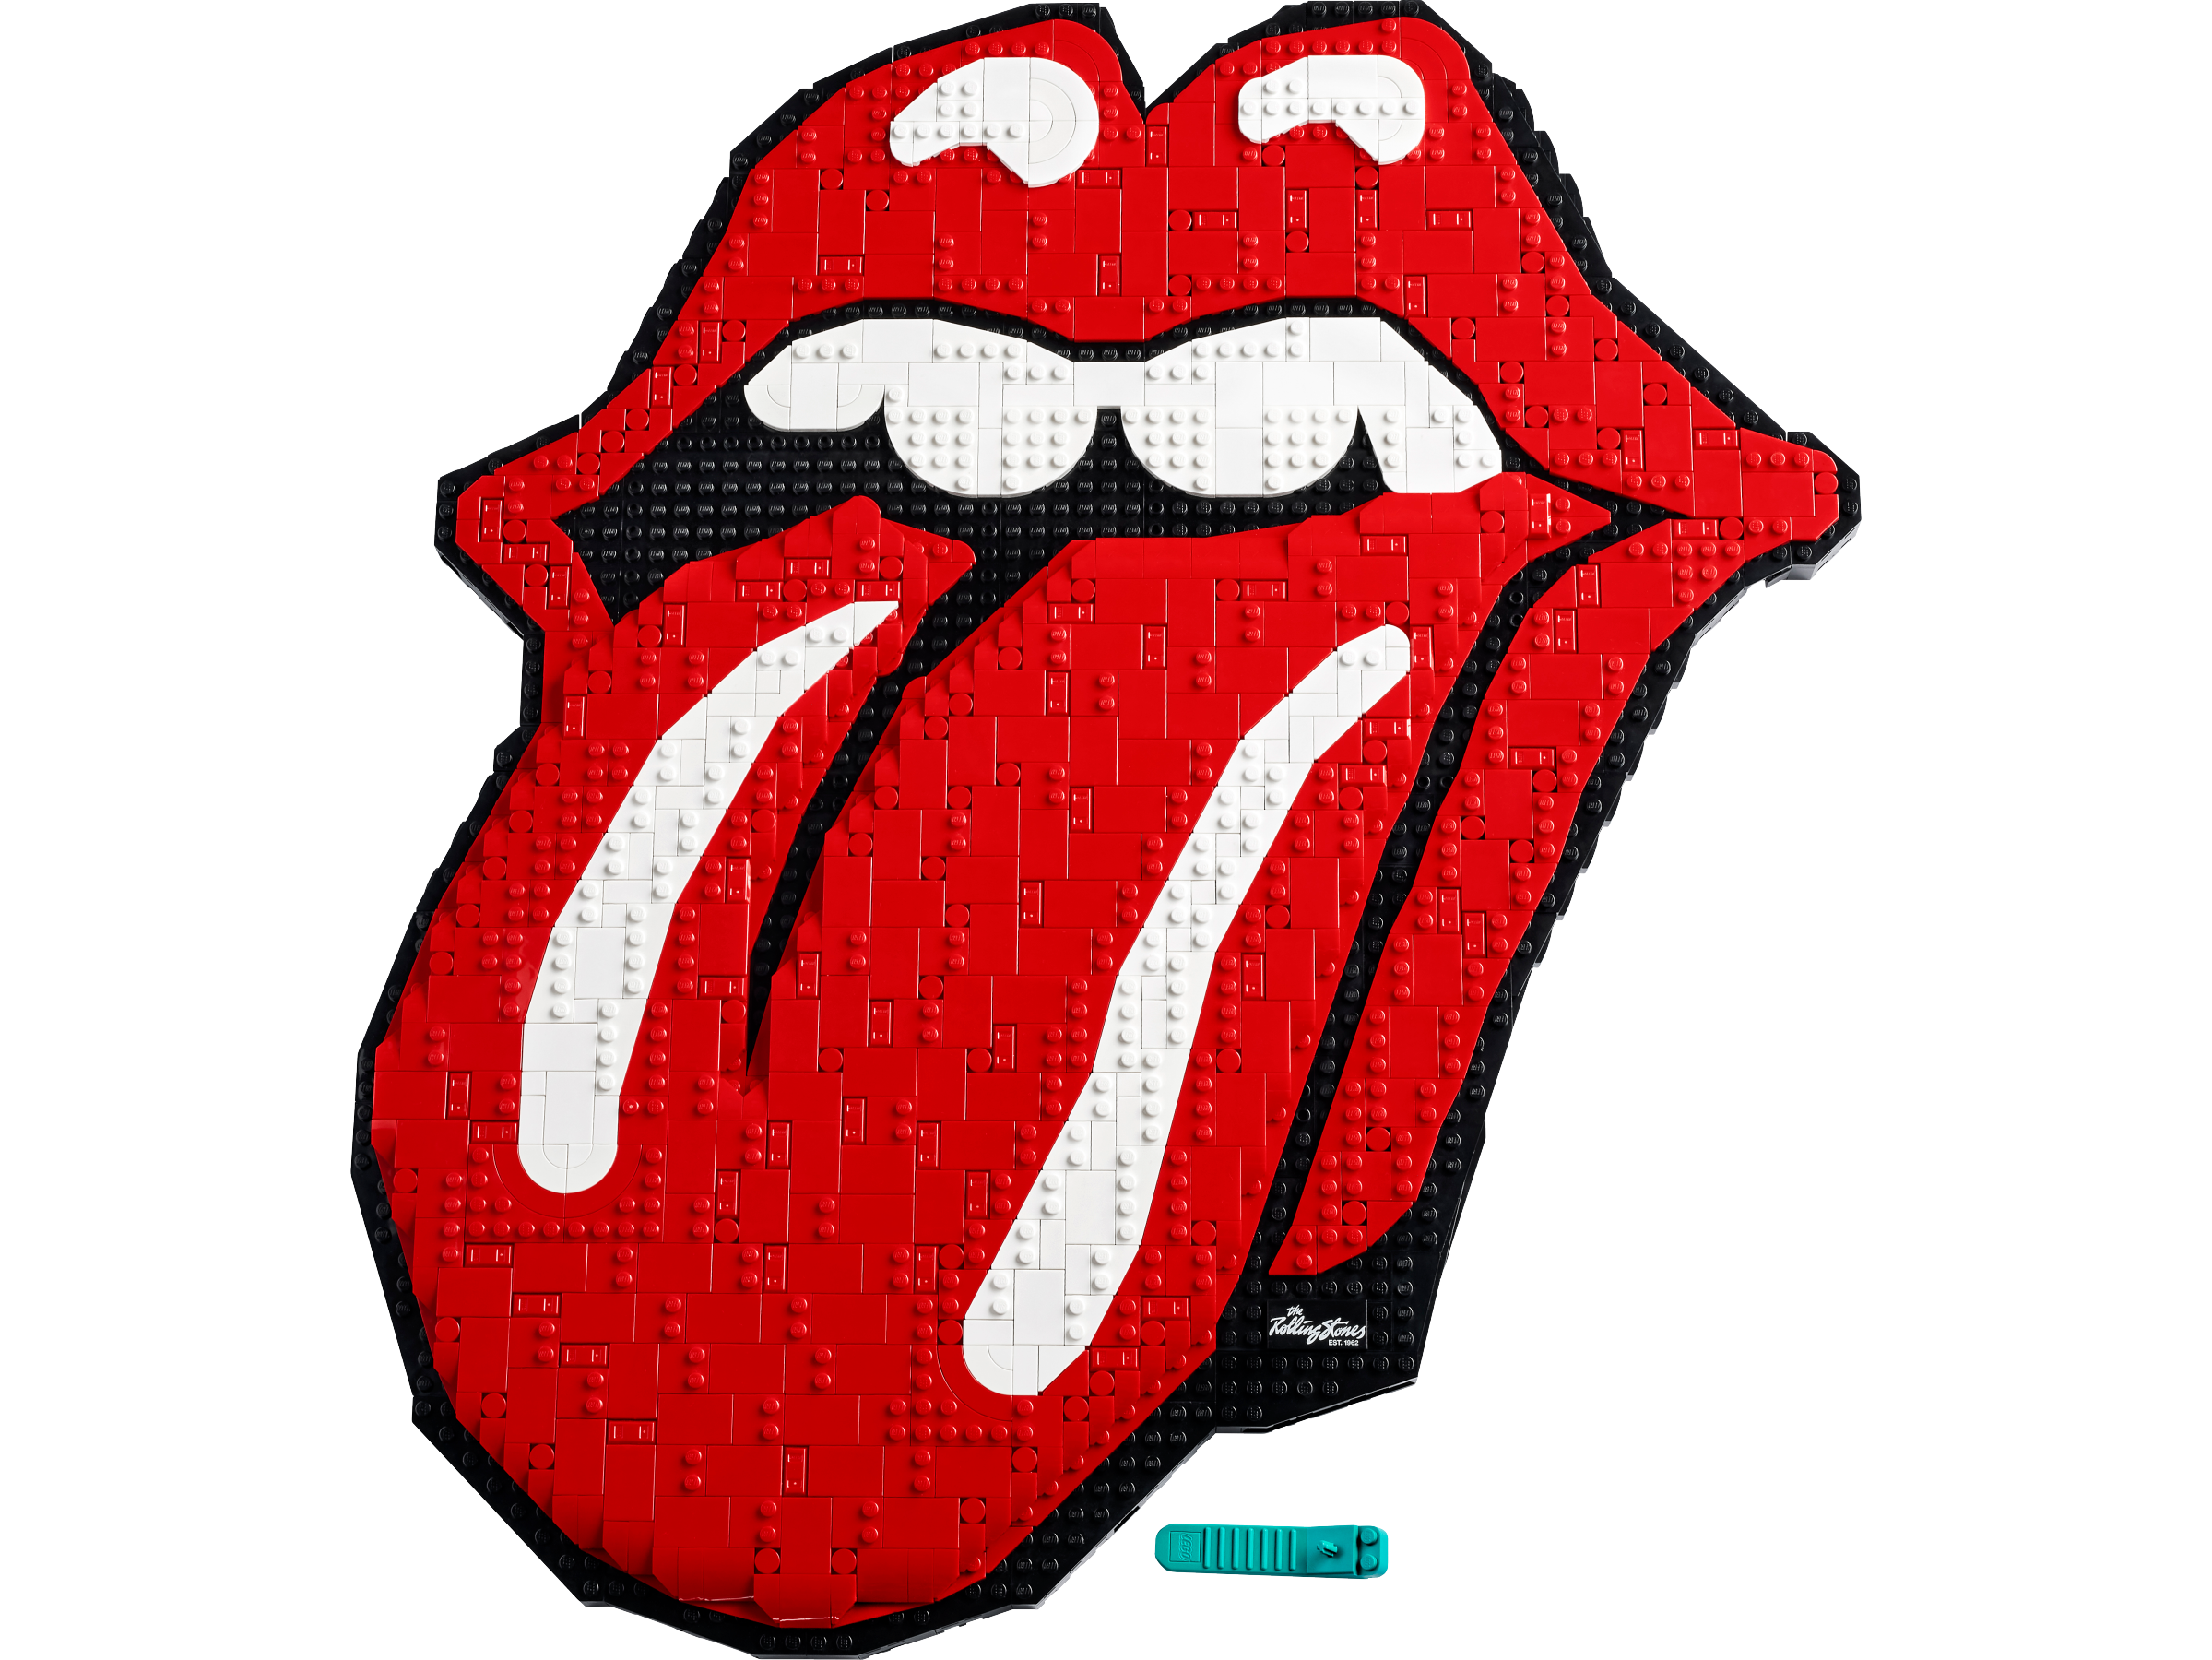 LEGO IDEAS - The Rolling Stones: Legends of Rock - Route 66 (The Fist Song,  From the Fist Album) by the Rolling Stones